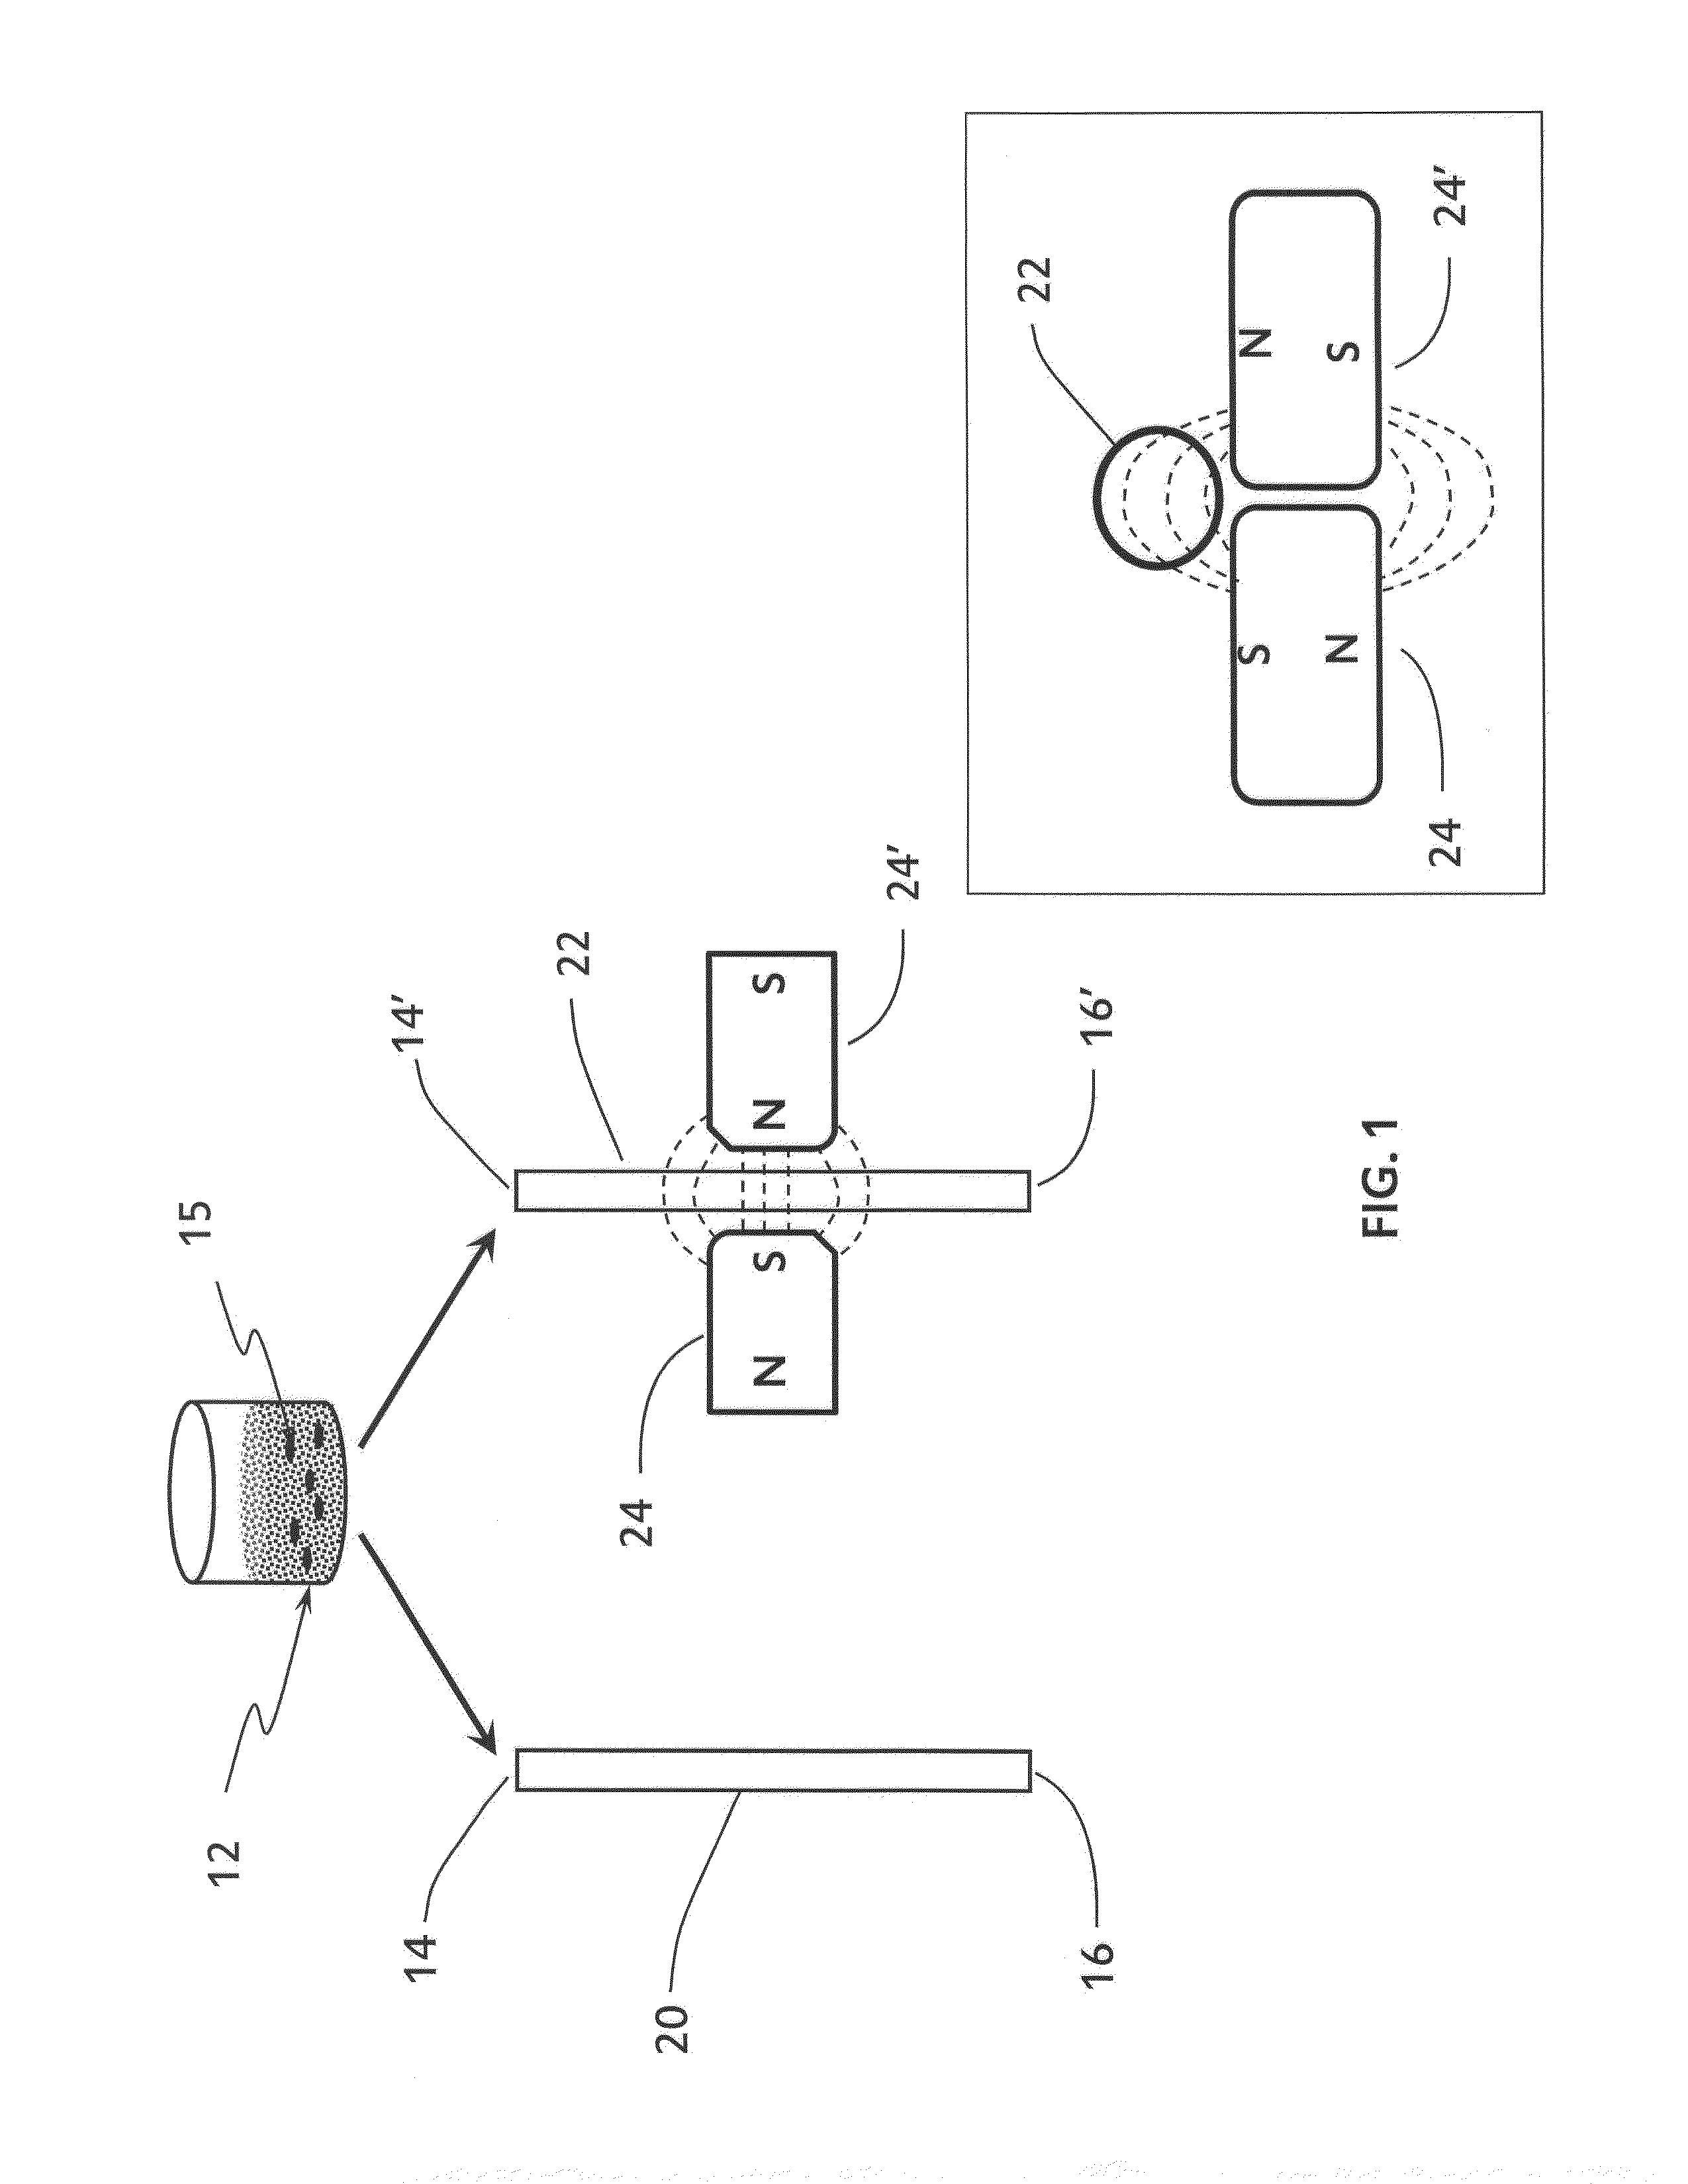 Device and method for detection and identification of immunological proteins, pathogenic and microbial agents and cells